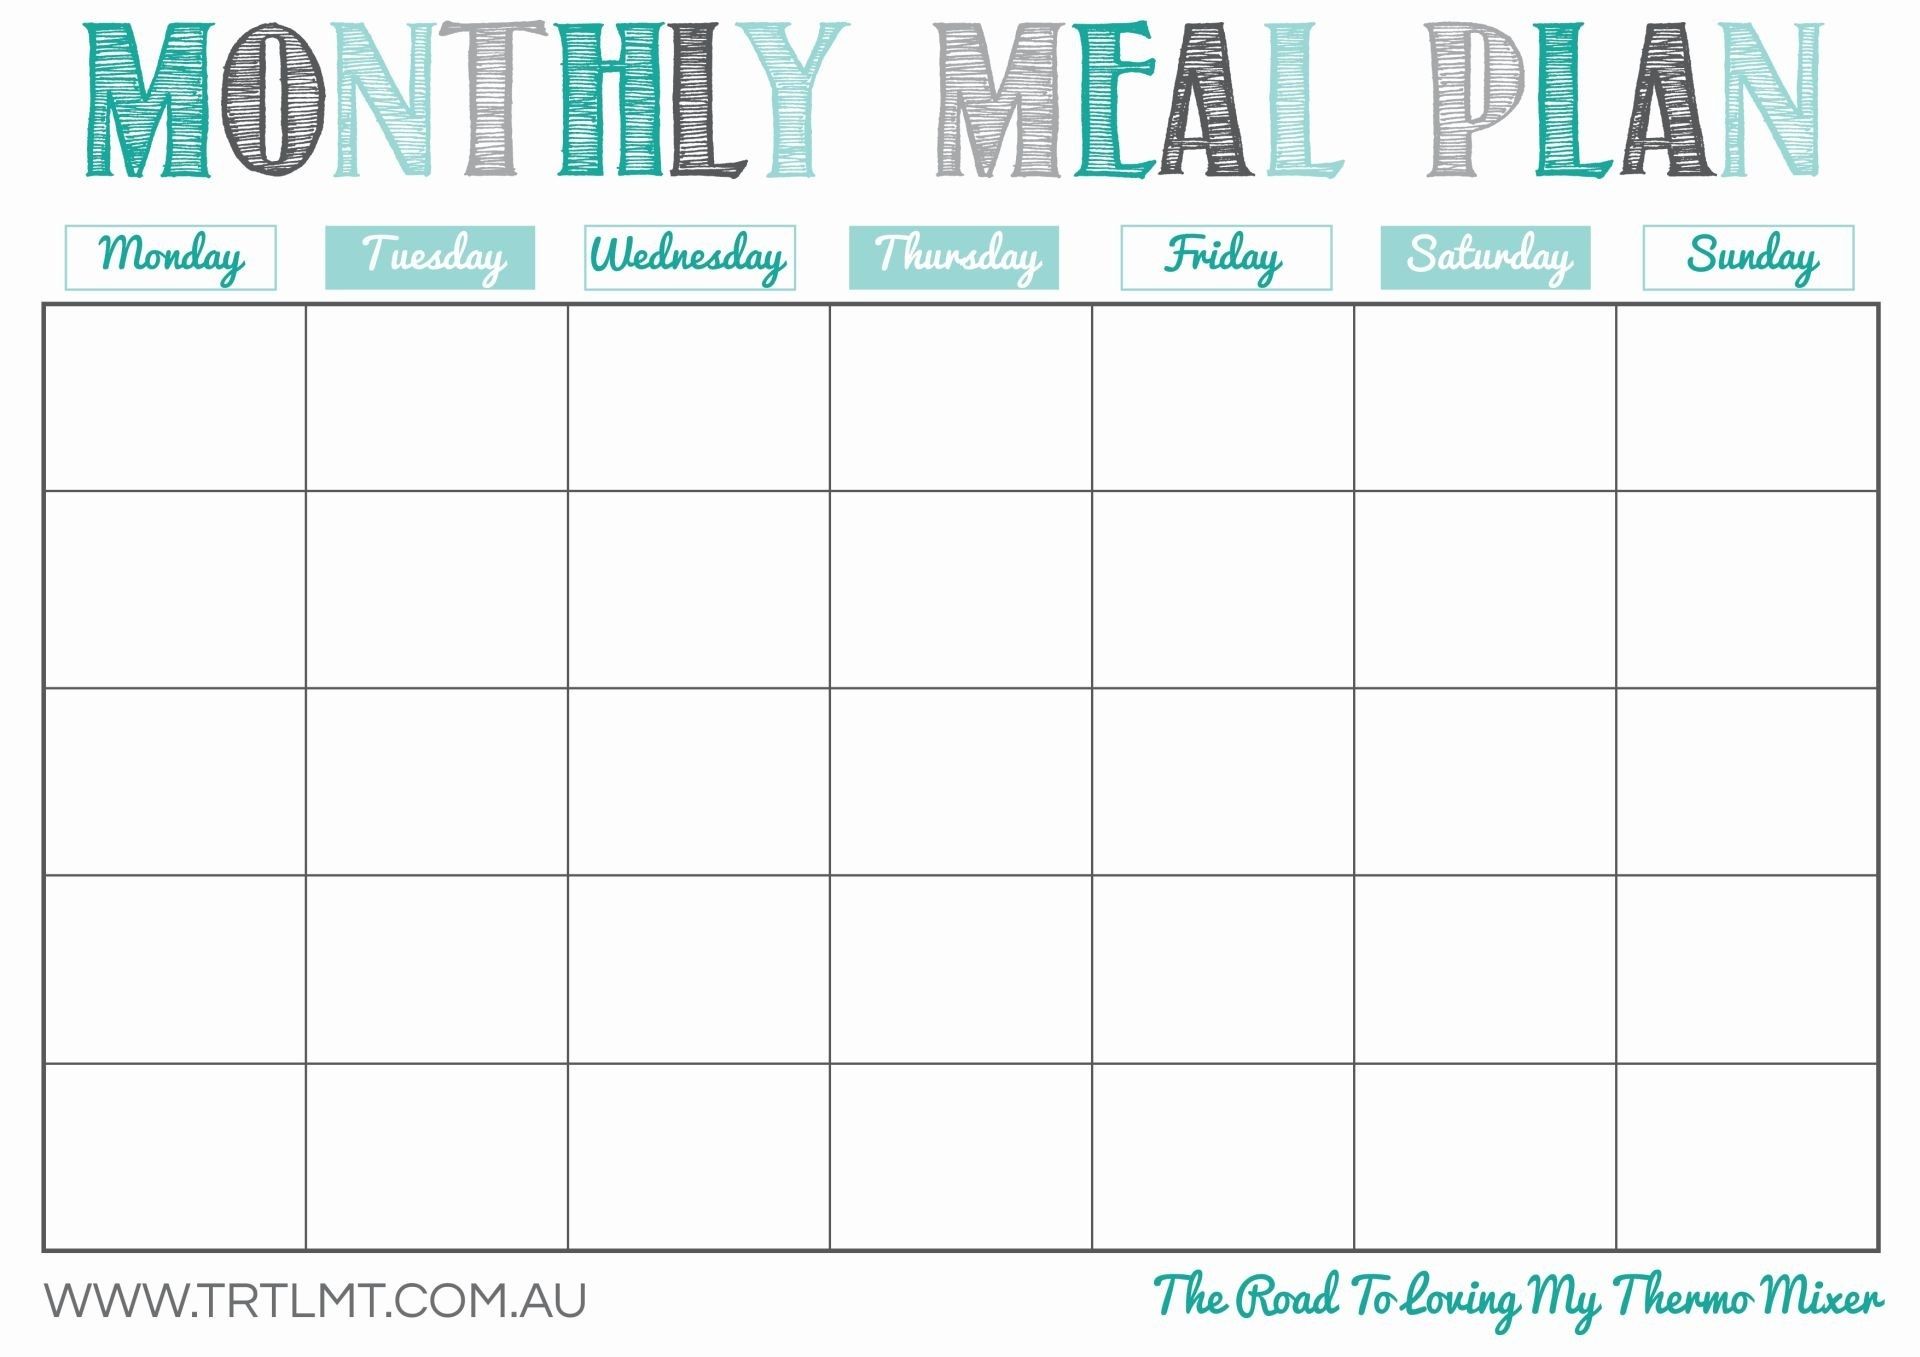 Printable Monthly Meal Planner | hauck mansion